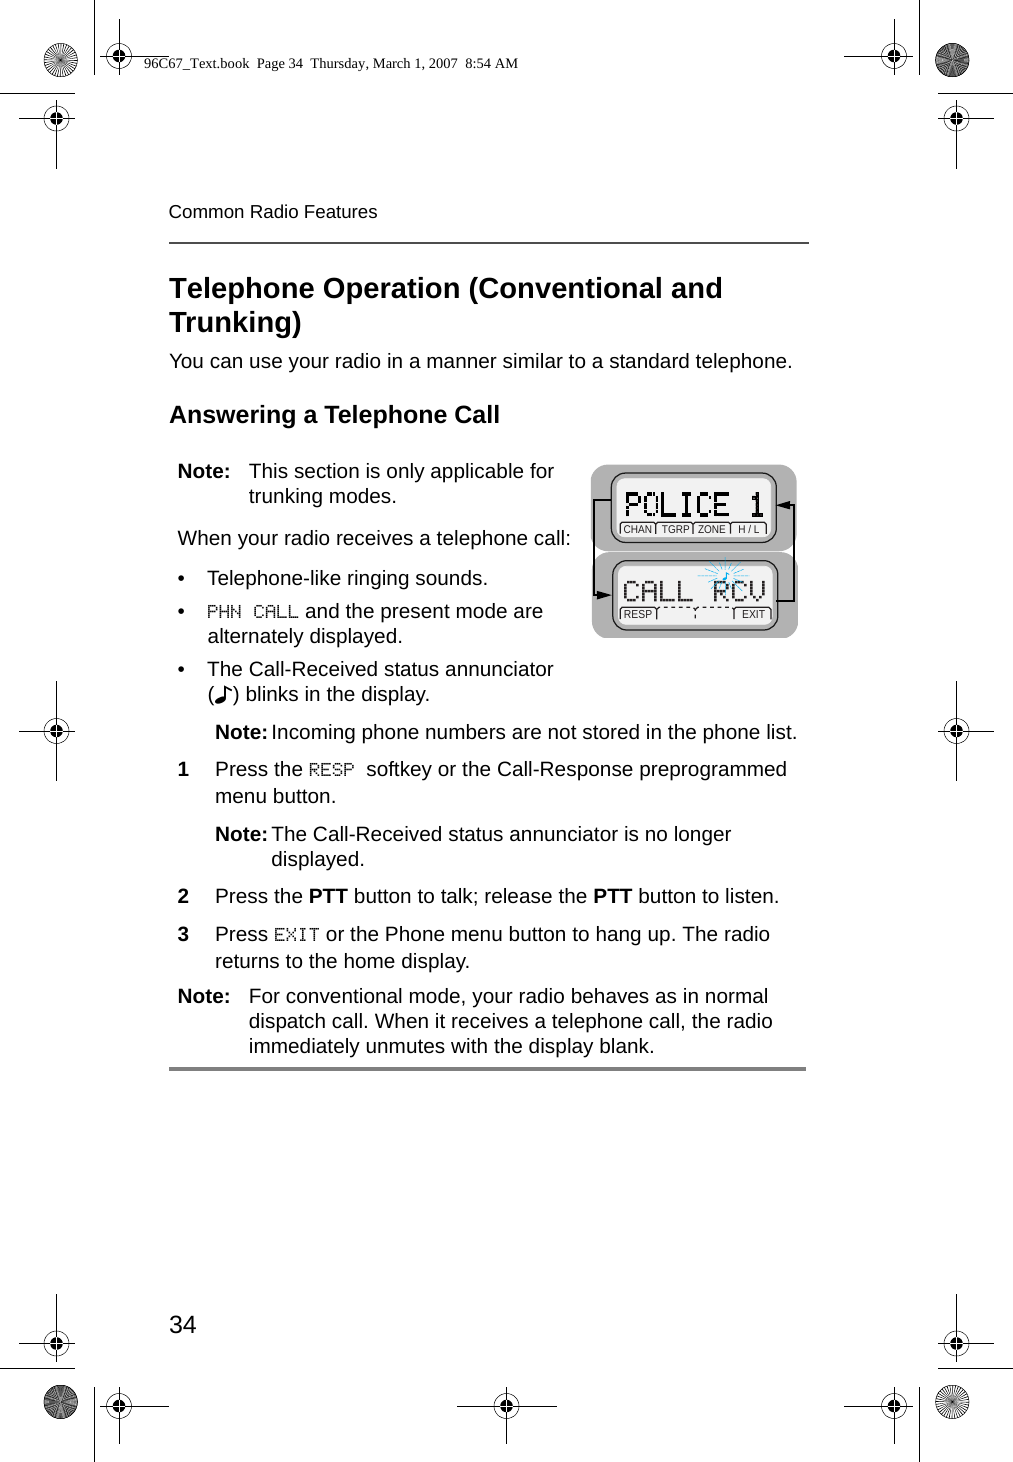 34Common Radio FeaturesTelephone Operation (Conventional and Trunking)You can use your radio in a manner similar to a standard telephone.Answering a Telephone CallNote: This section is only applicable for trunking modes.When your radio receives a telephone call:• Telephone-like ringing sounds.•PHN CALL and the present mode are alternately displayed.• The Call-Received status annunciator (F) blinks in the display.Note:Incoming phone numbers are not stored in the phone list.1Press the RESP softkey or the Call-Response preprogrammed menu button.Note:The Call-Received status annunciator is no longer displayed.2Press the PTT button to talk; release the PTT button to listen.3Press EXIT or the Phone menu button to hang up. The radio returns to the home display.Note: For conventional mode, your radio behaves as in normal dispatch call. When it receives a telephone call, the radio immediately unmutes with the display blank.RESP       EXITCHAN   TGRP   ZONE      H / L96C67_Text.book  Page 34  Thursday, March 1, 2007  8:54 AM